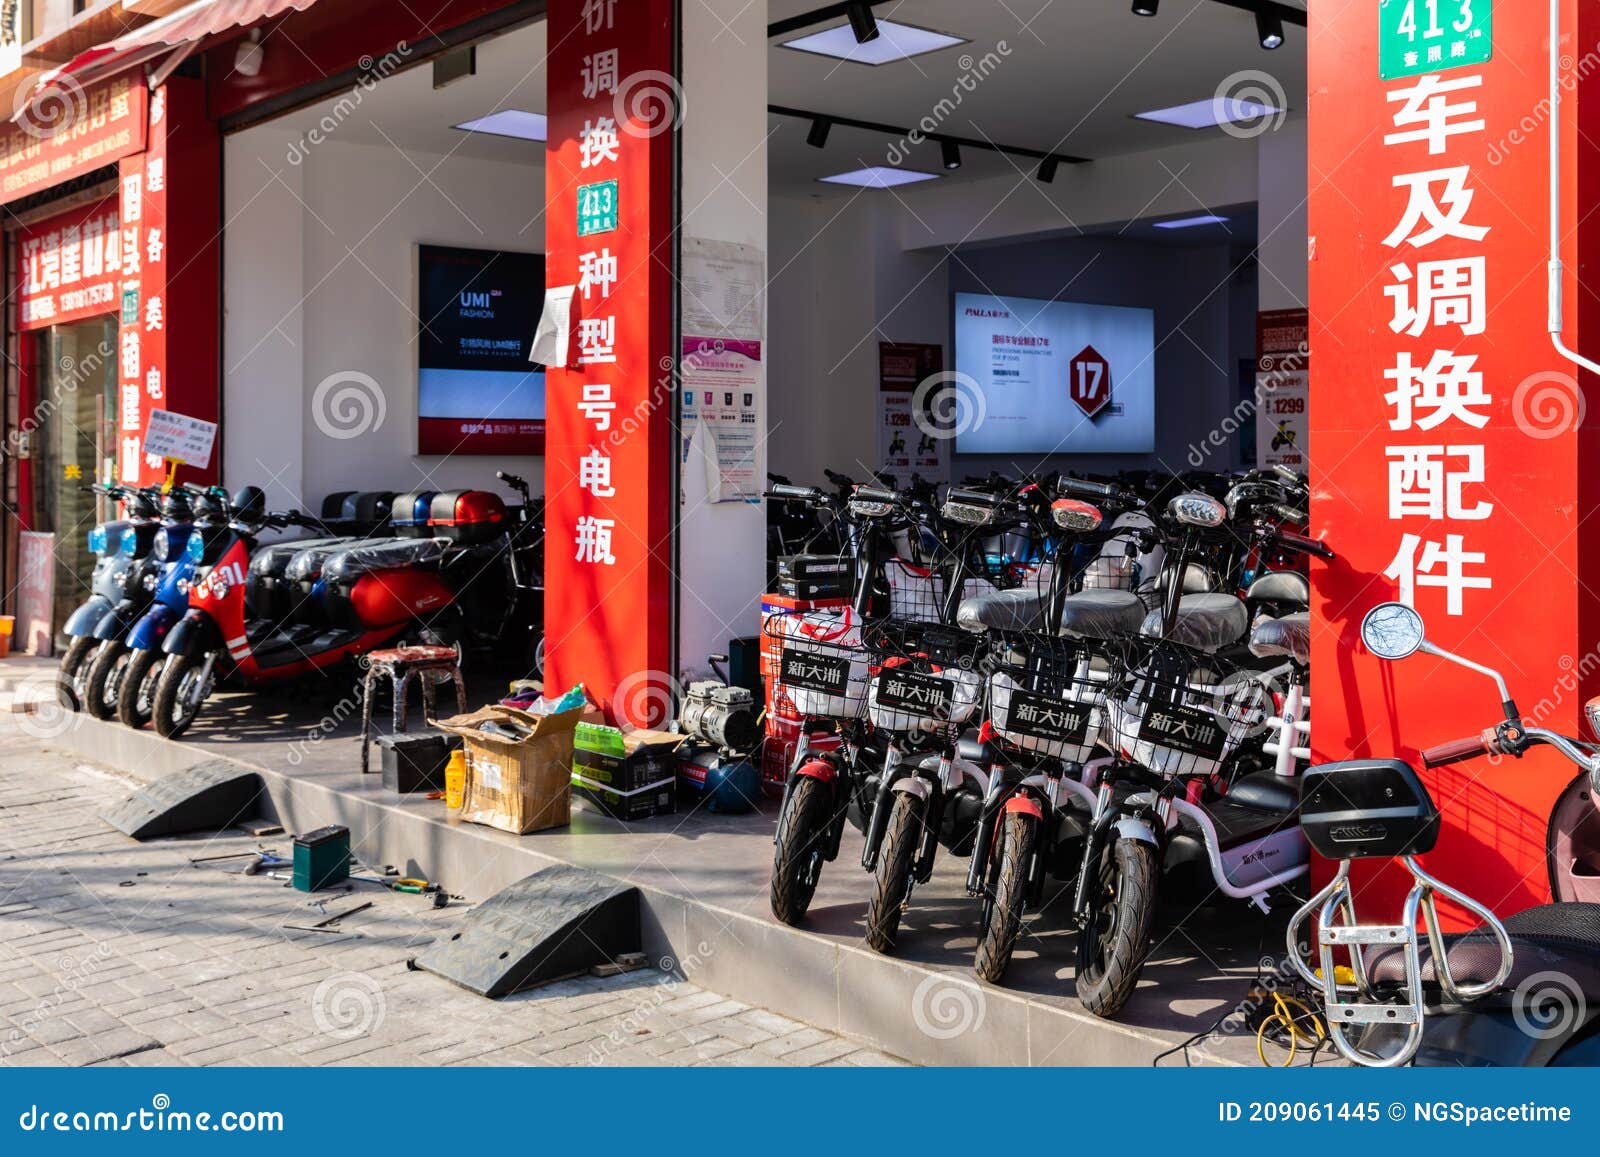 A Electric Shop on Kuizhao Road Near Jiangwanzhen Editorial Image - Image of lifestyle, design: 209061445